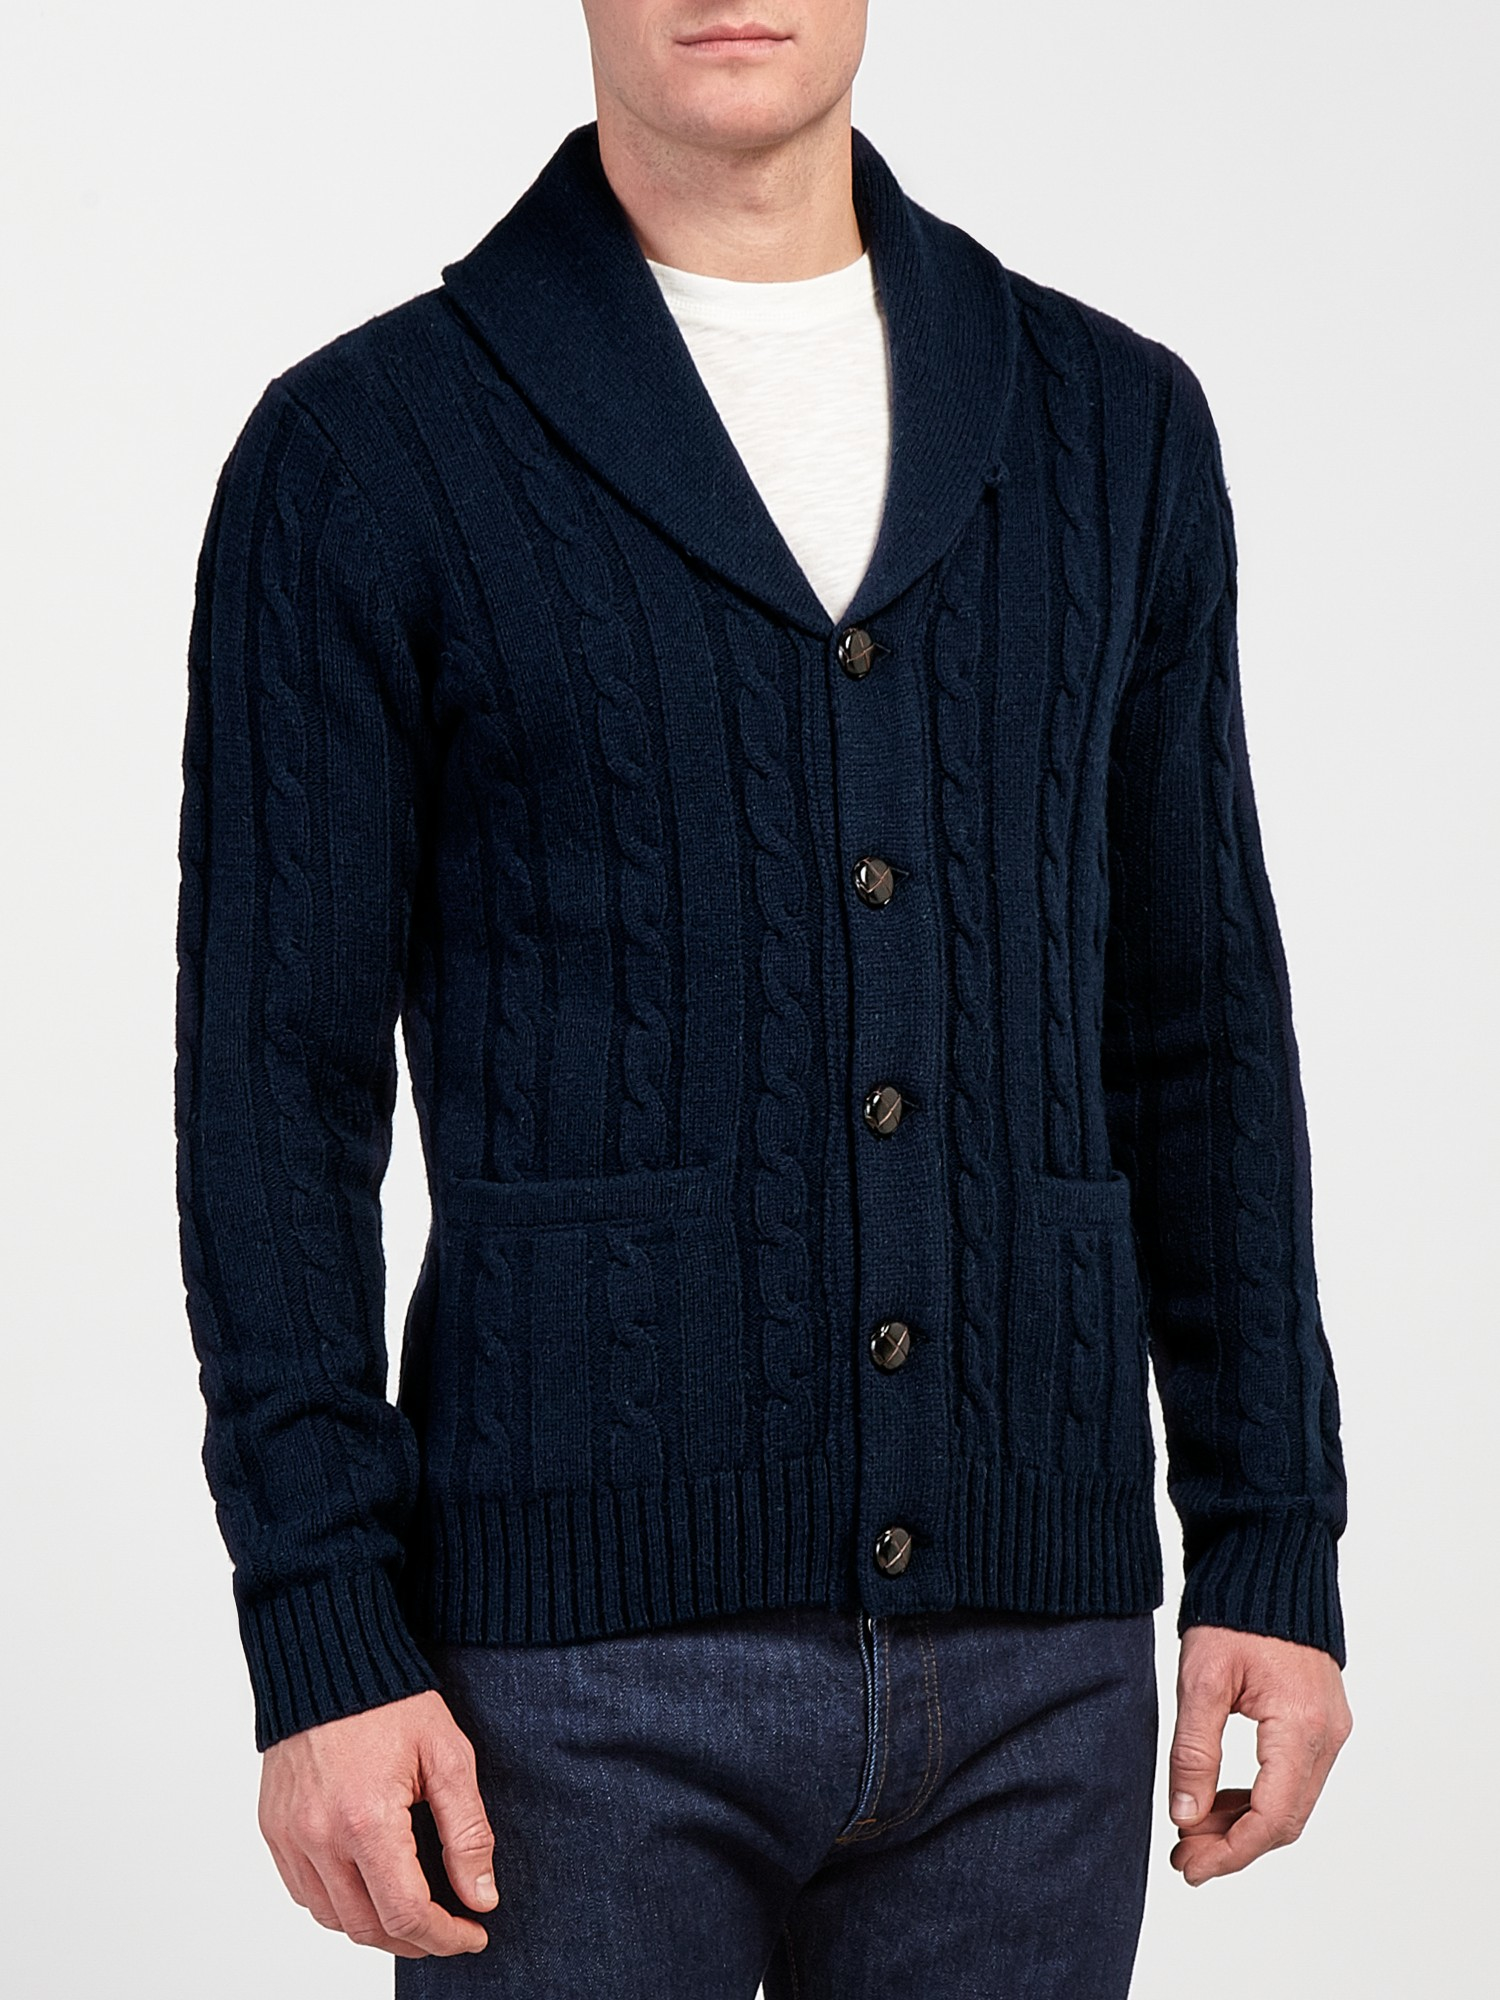 GANT Suede Lambswool Cable Knit Cardigan in Blue for Men - Lyst